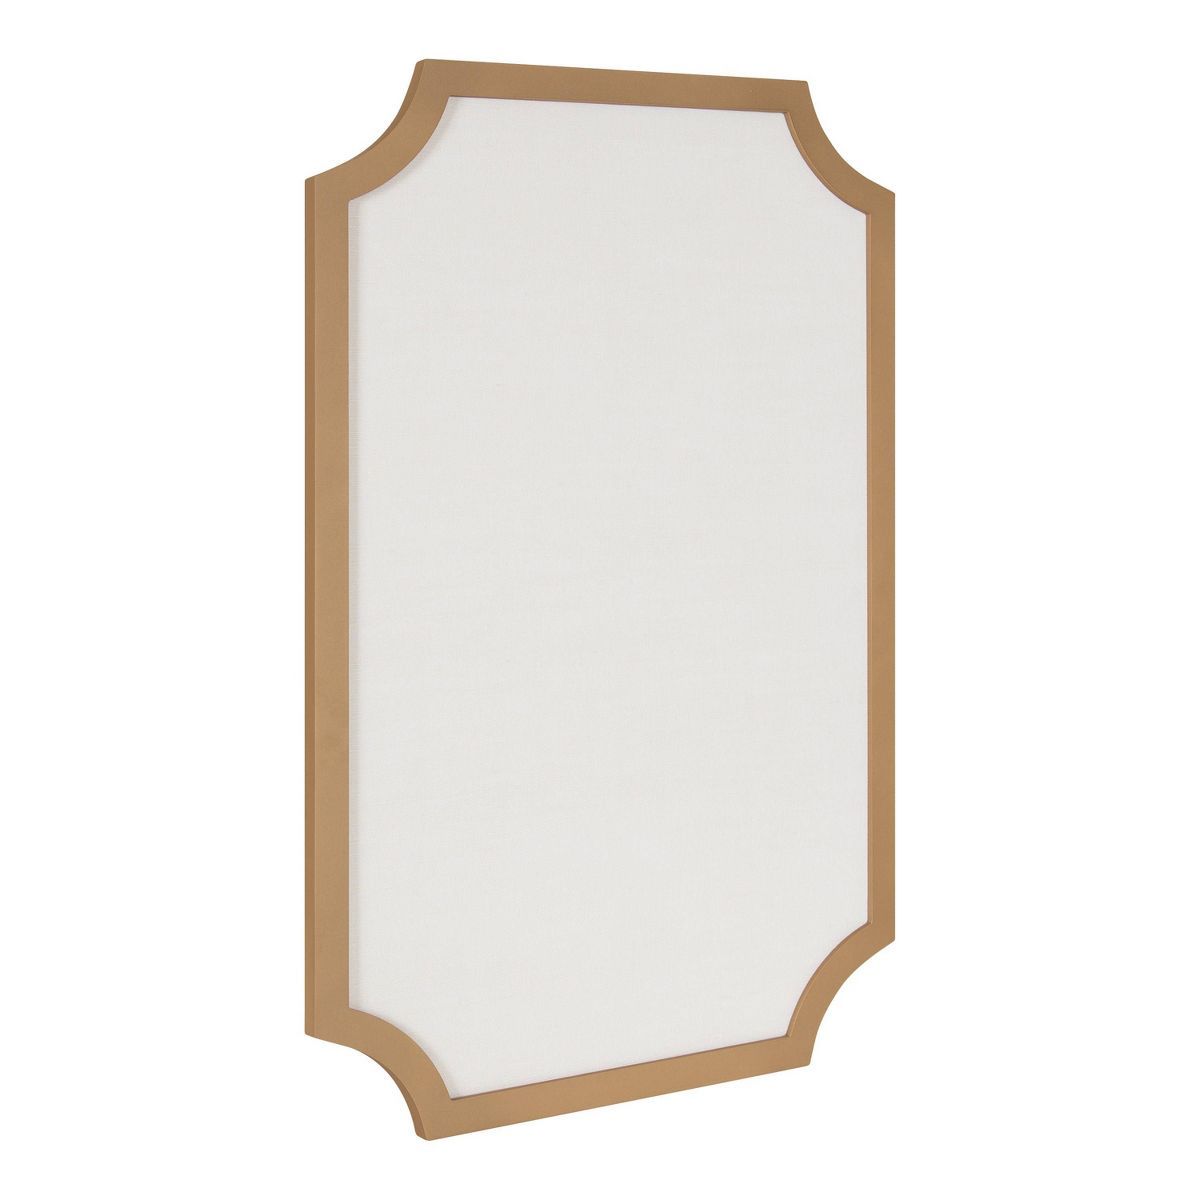 24" x 36" Holbrook Pinboard Style-1 Gold - Kate & Laurel All Things Decor | Target